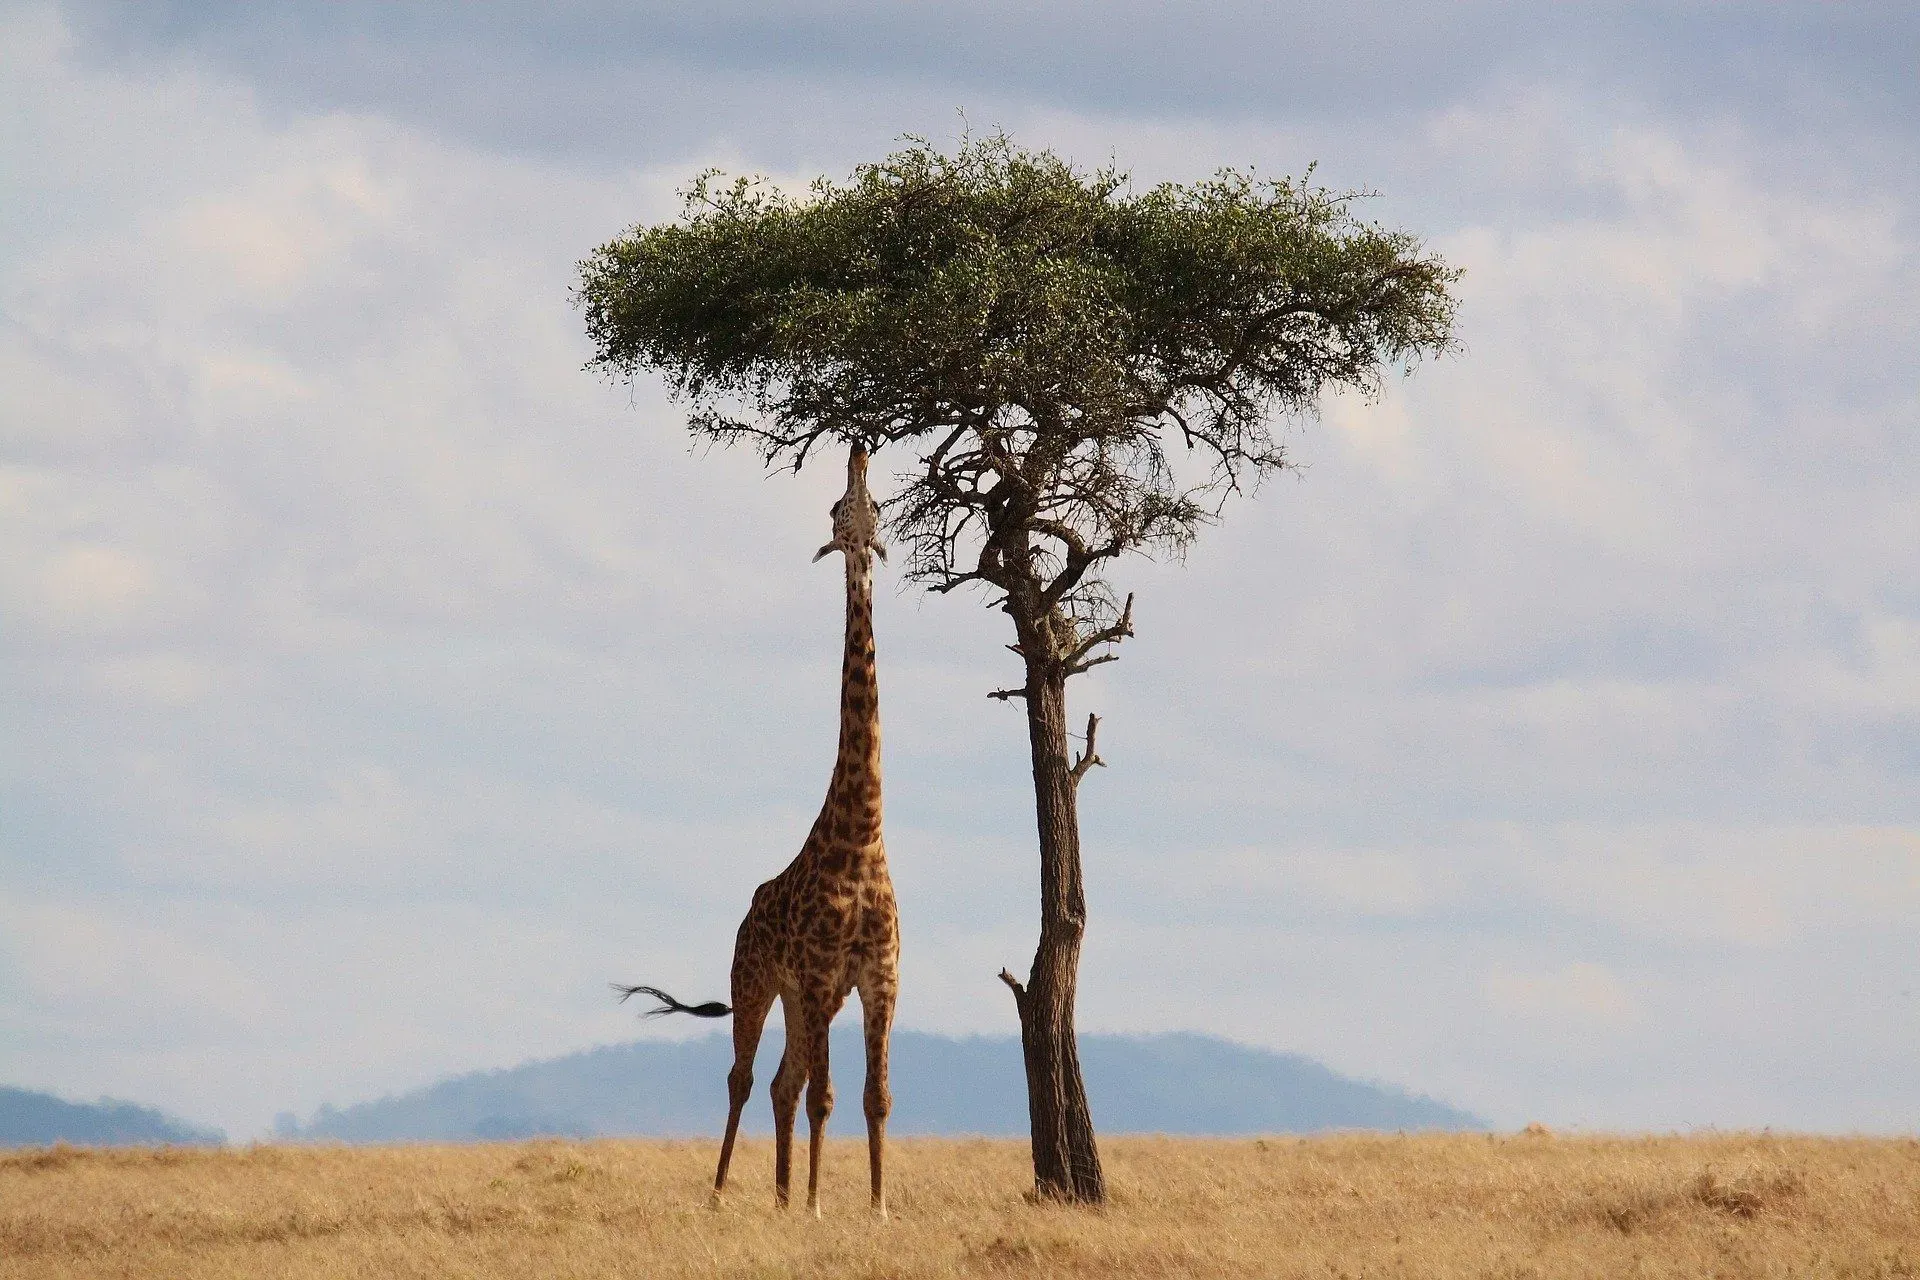 Read about giraffes, animals that are believed to be related to long-necked dinosaurs, and their interesting genes.